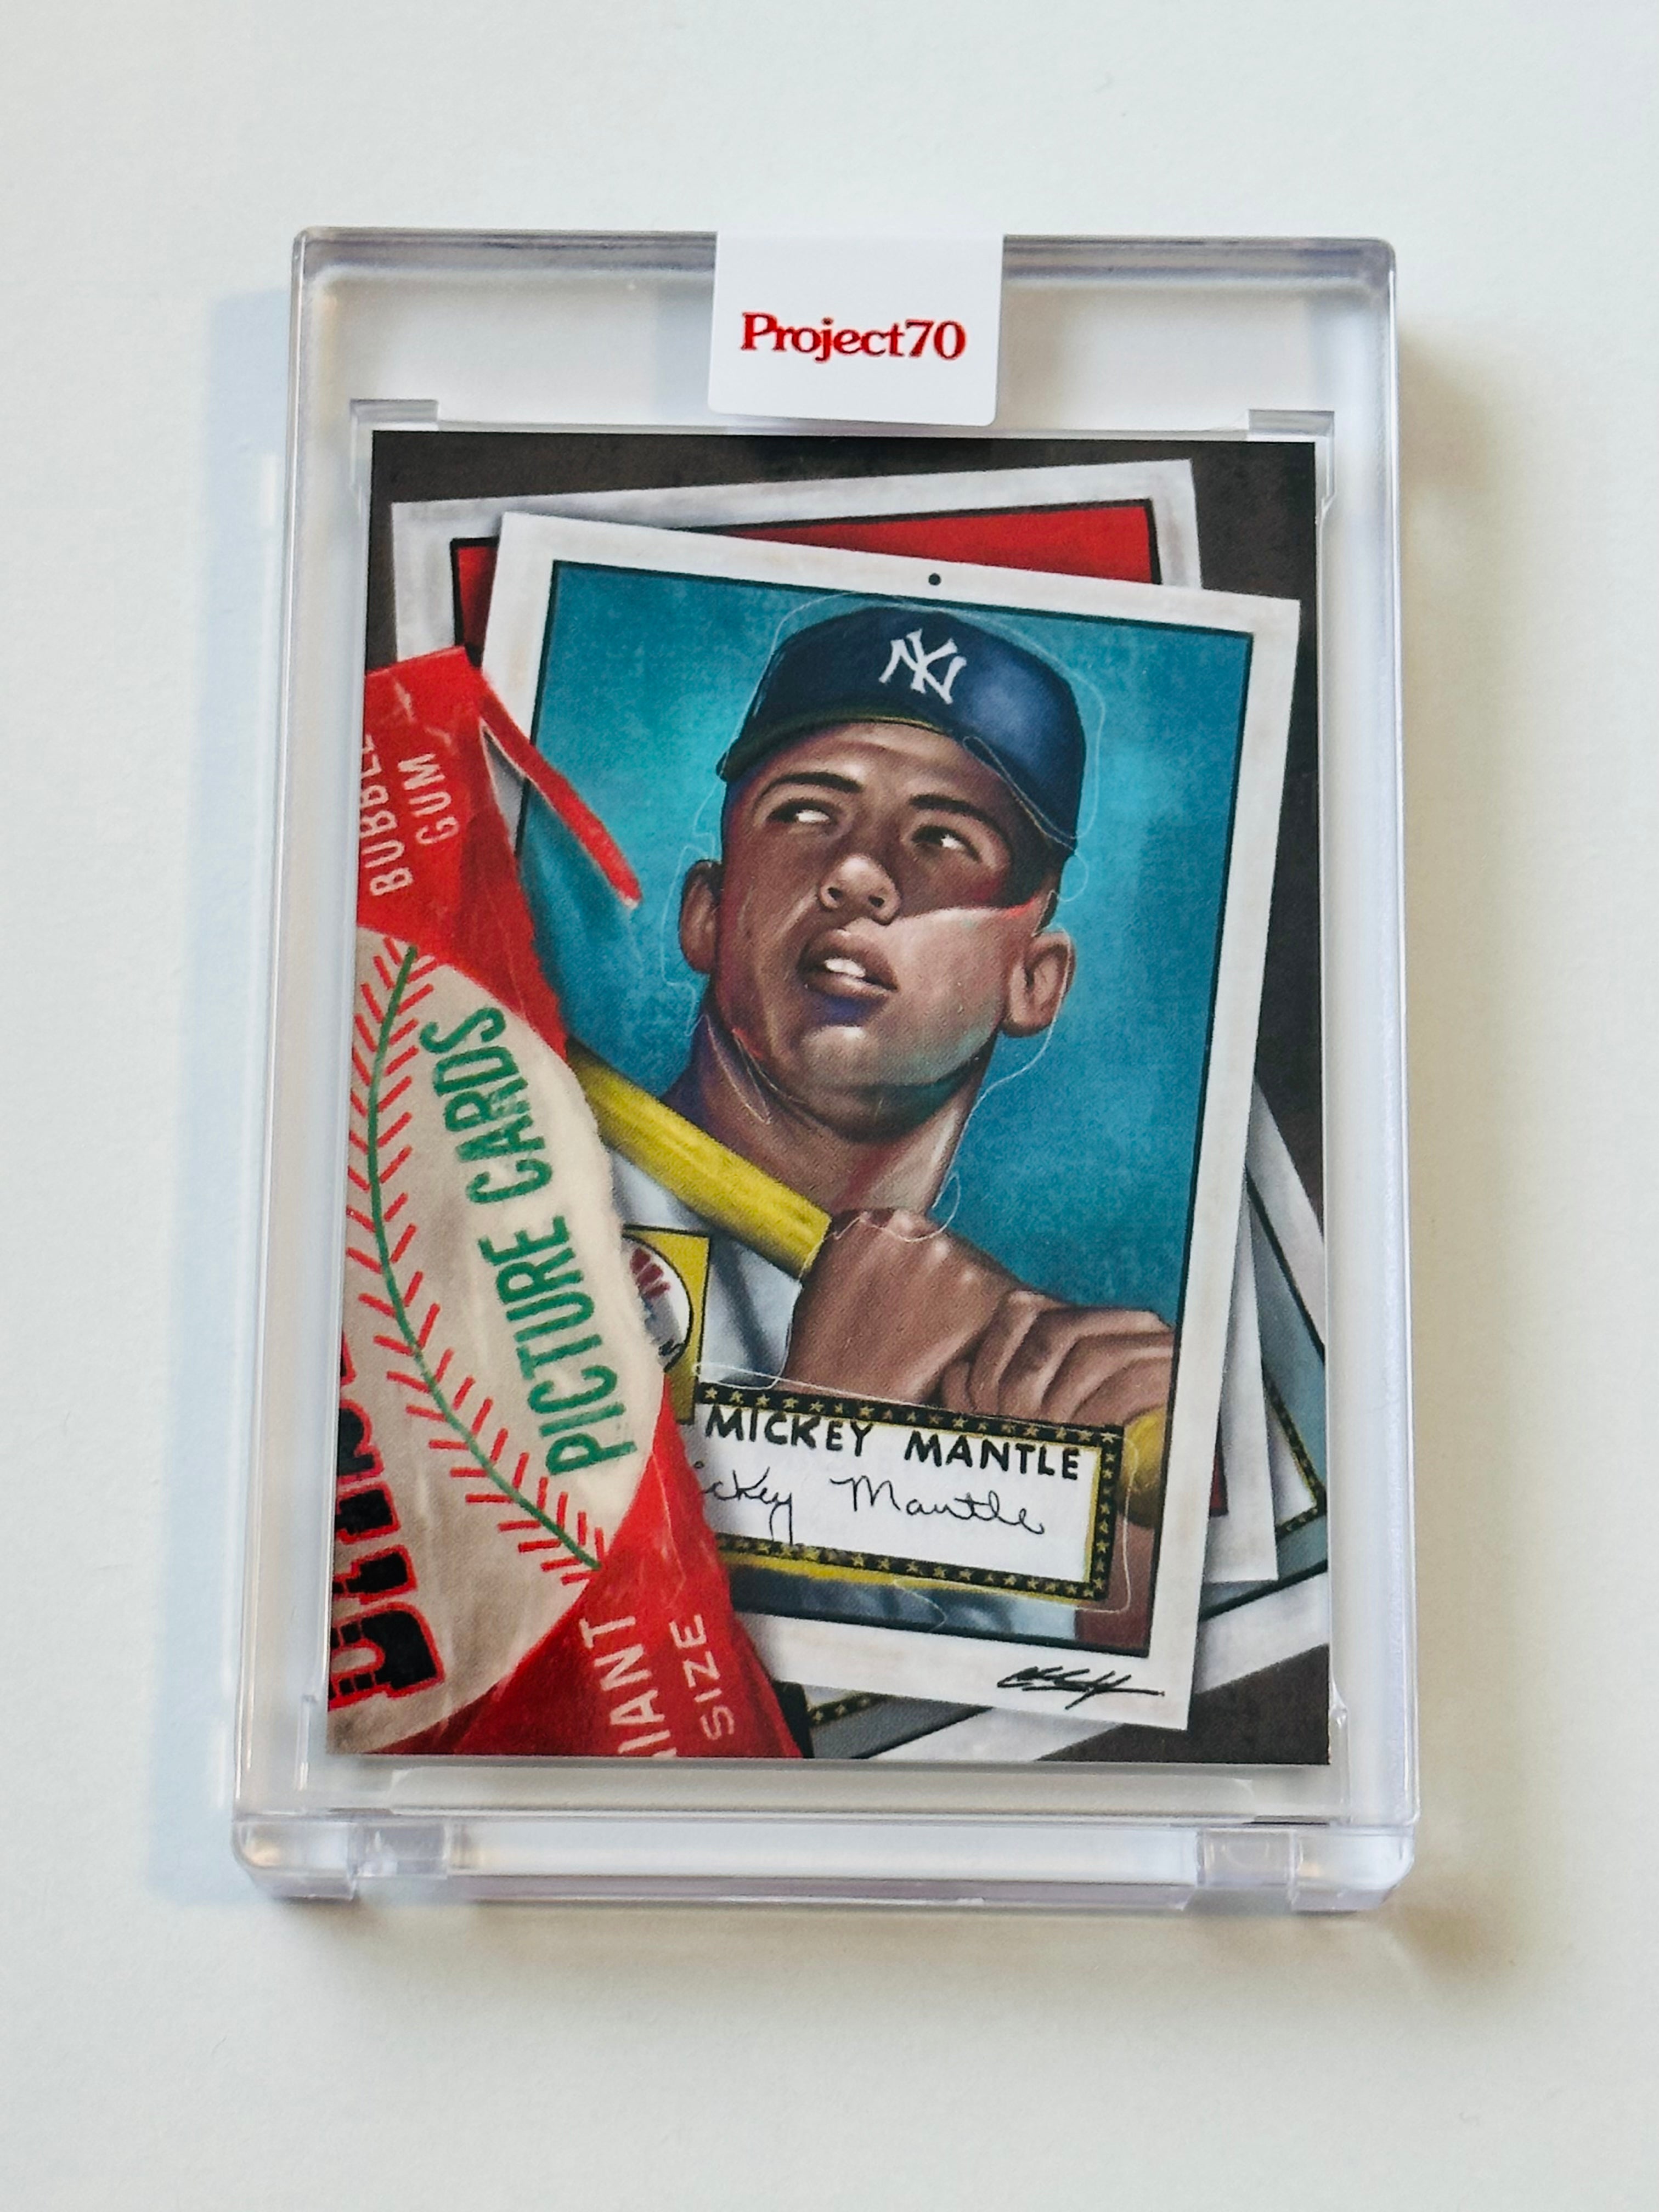 Mickey Mantle Project 70 Topps limited issued graffiti baseball card